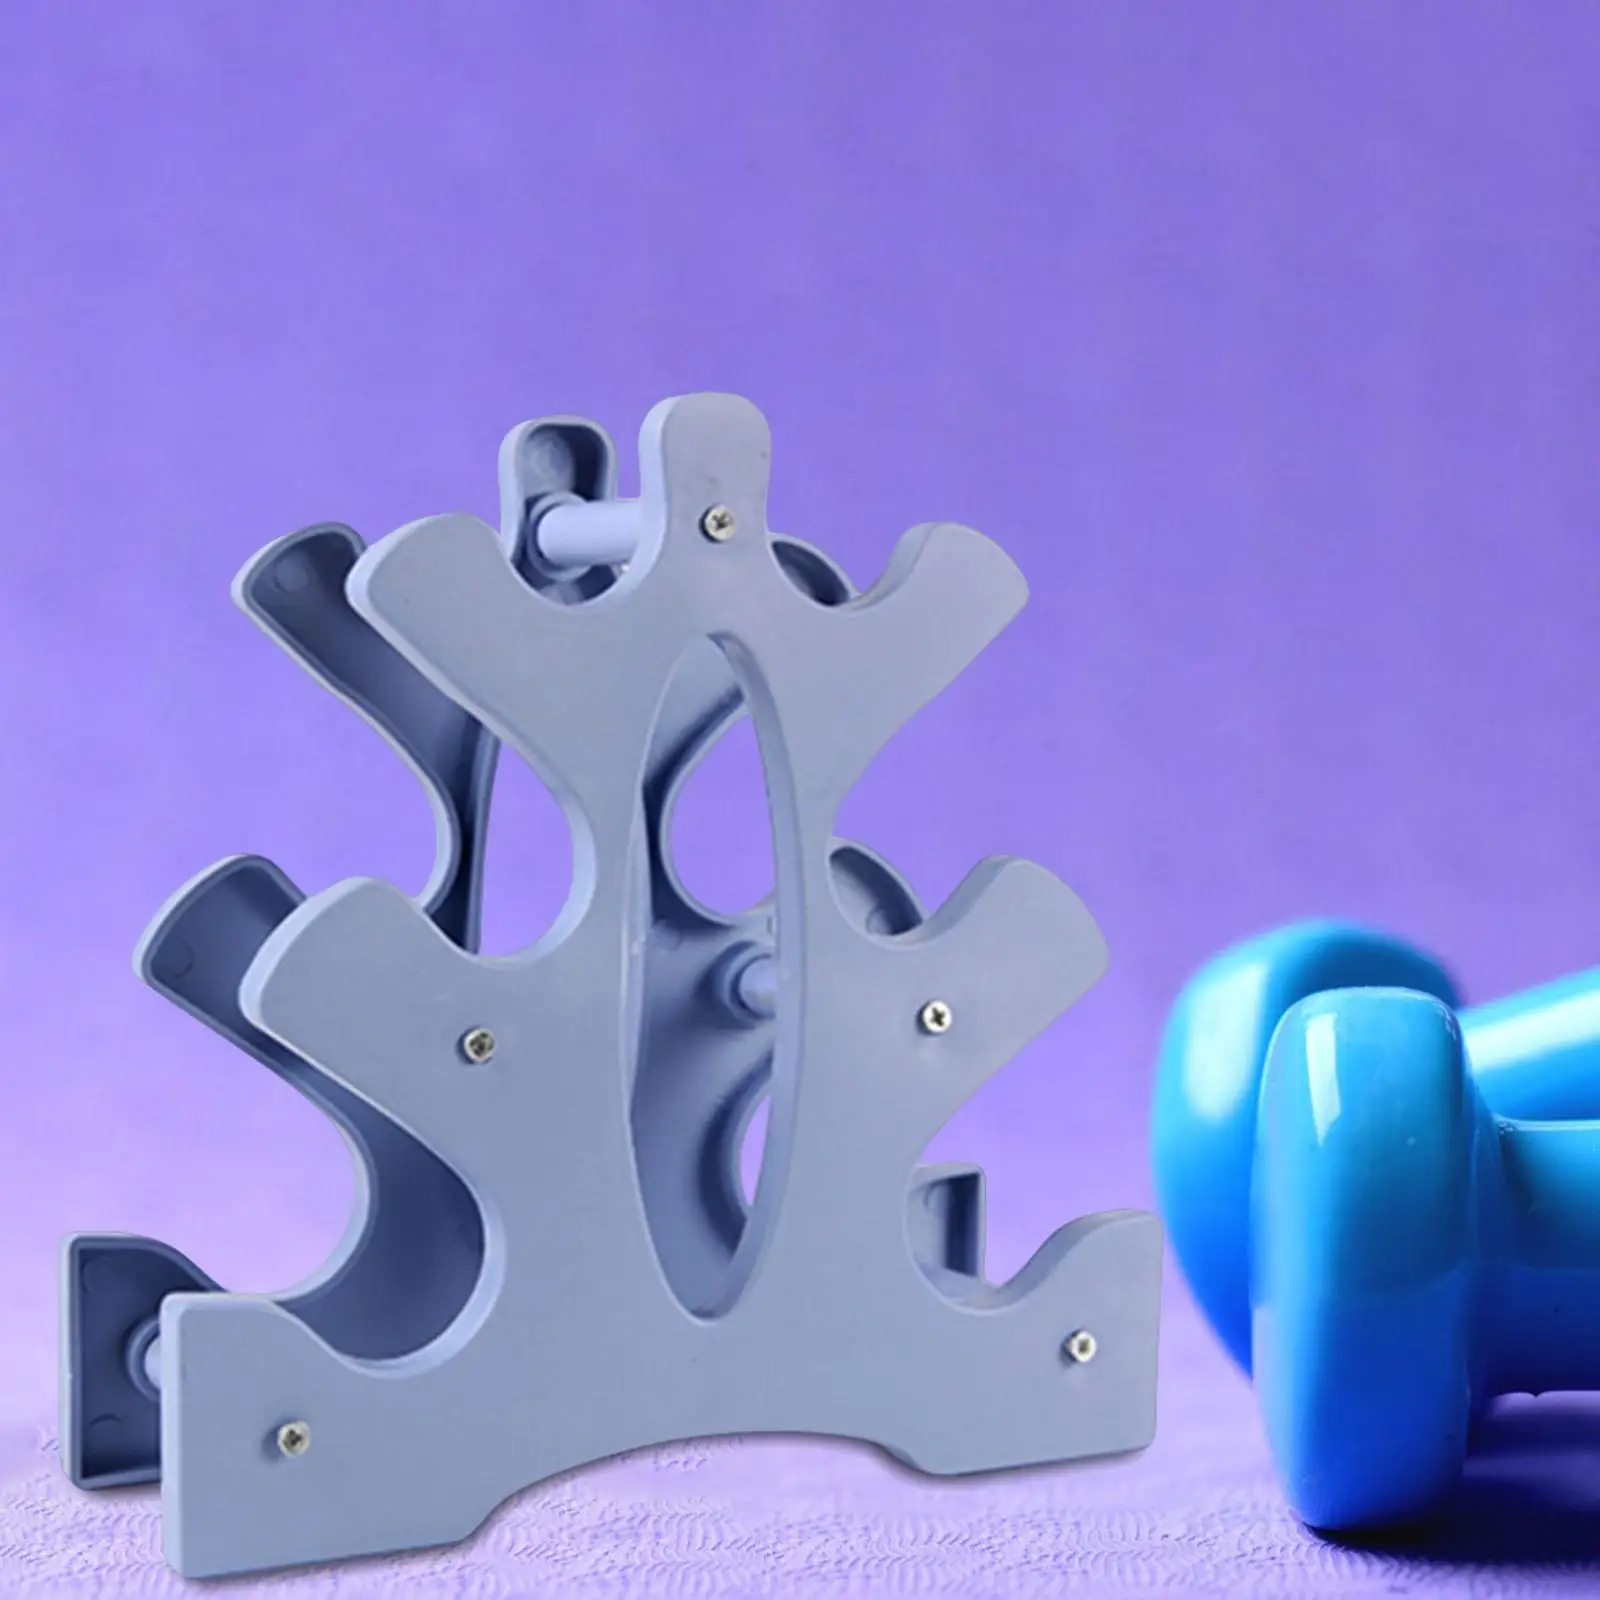 Portable Dumbbell Storage Holder 3 Layers Sports Fitness Tower Stand Weight Lifting Holder Dumbell Weight Rack for Home Office